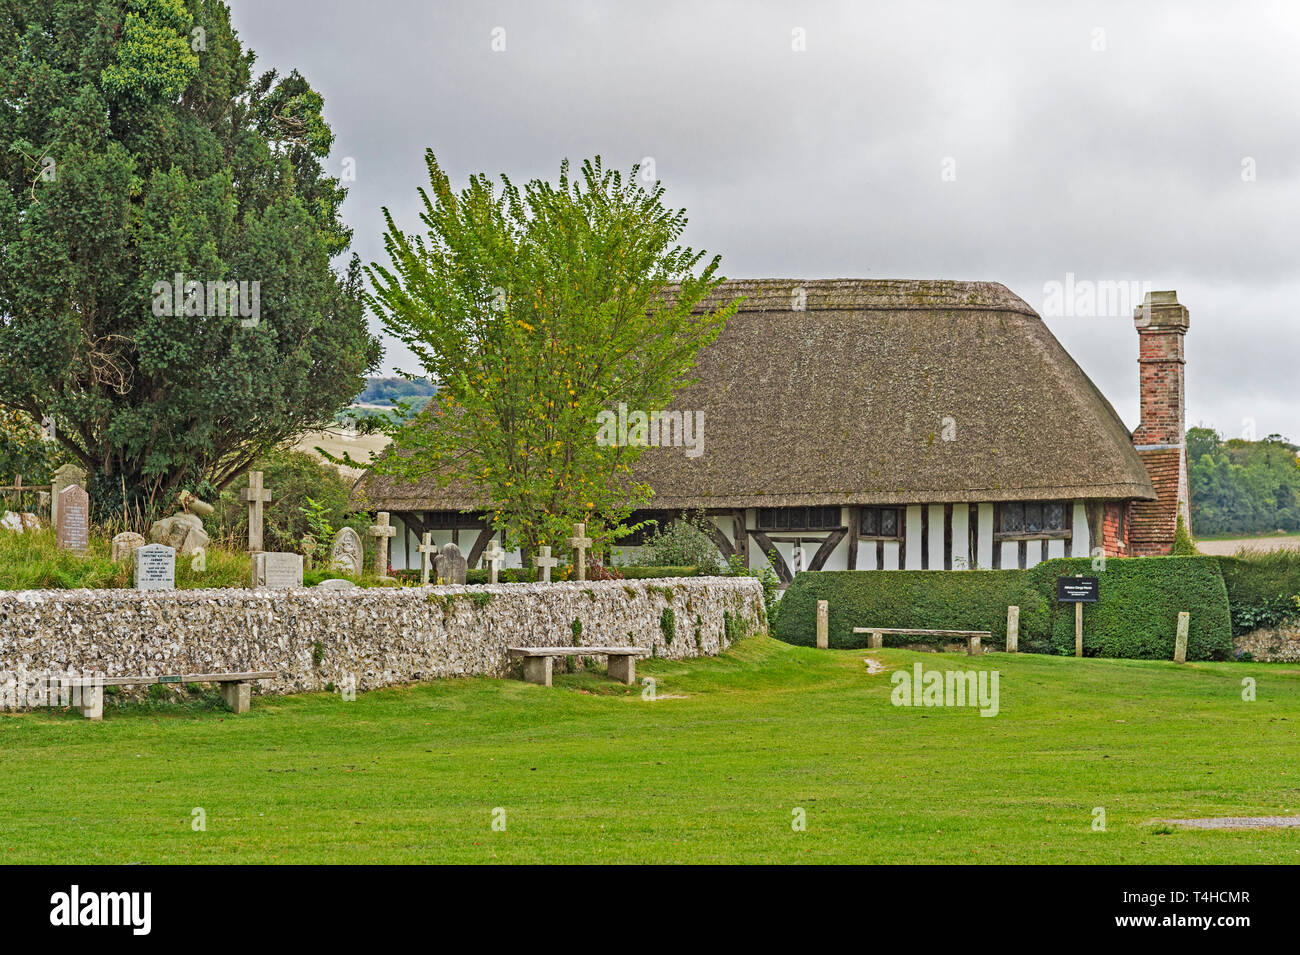 Alfriston (Sussex, England): Highstreet – shops and restaurant Stock Photo